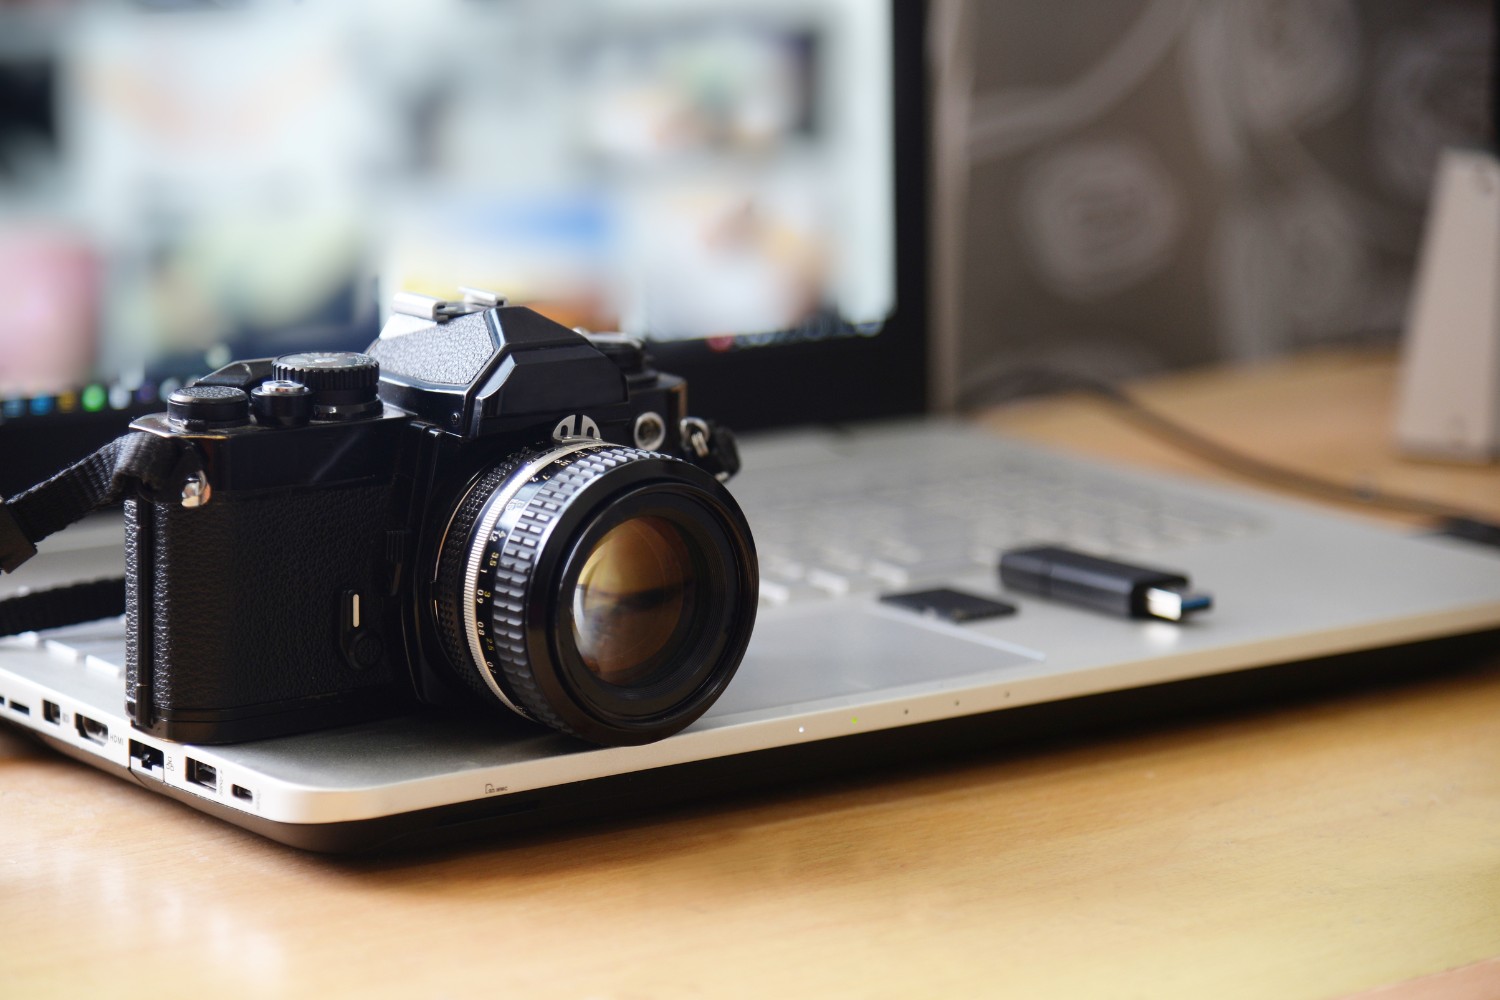 How To Upload Pictures From A DSLR Camera To A Laptop